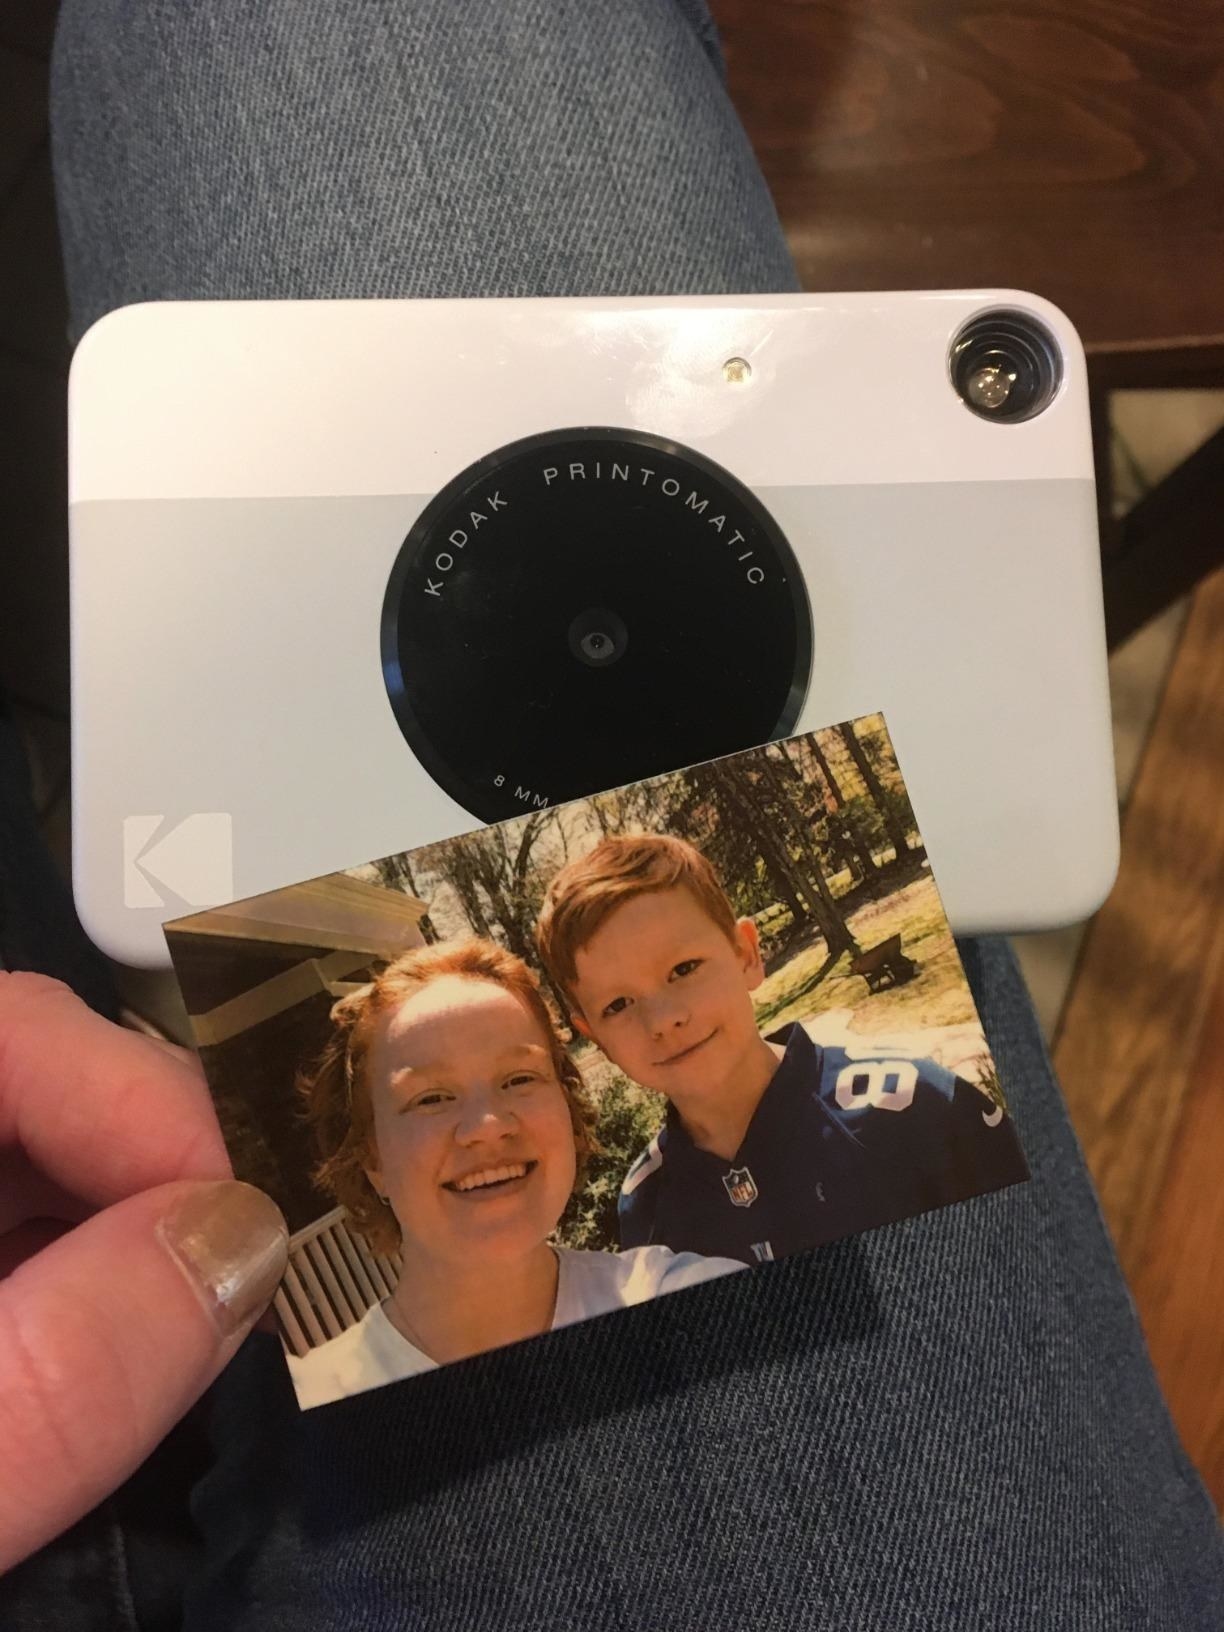 reviewer showing the white instant print camera with a photo of two people printed from the camera